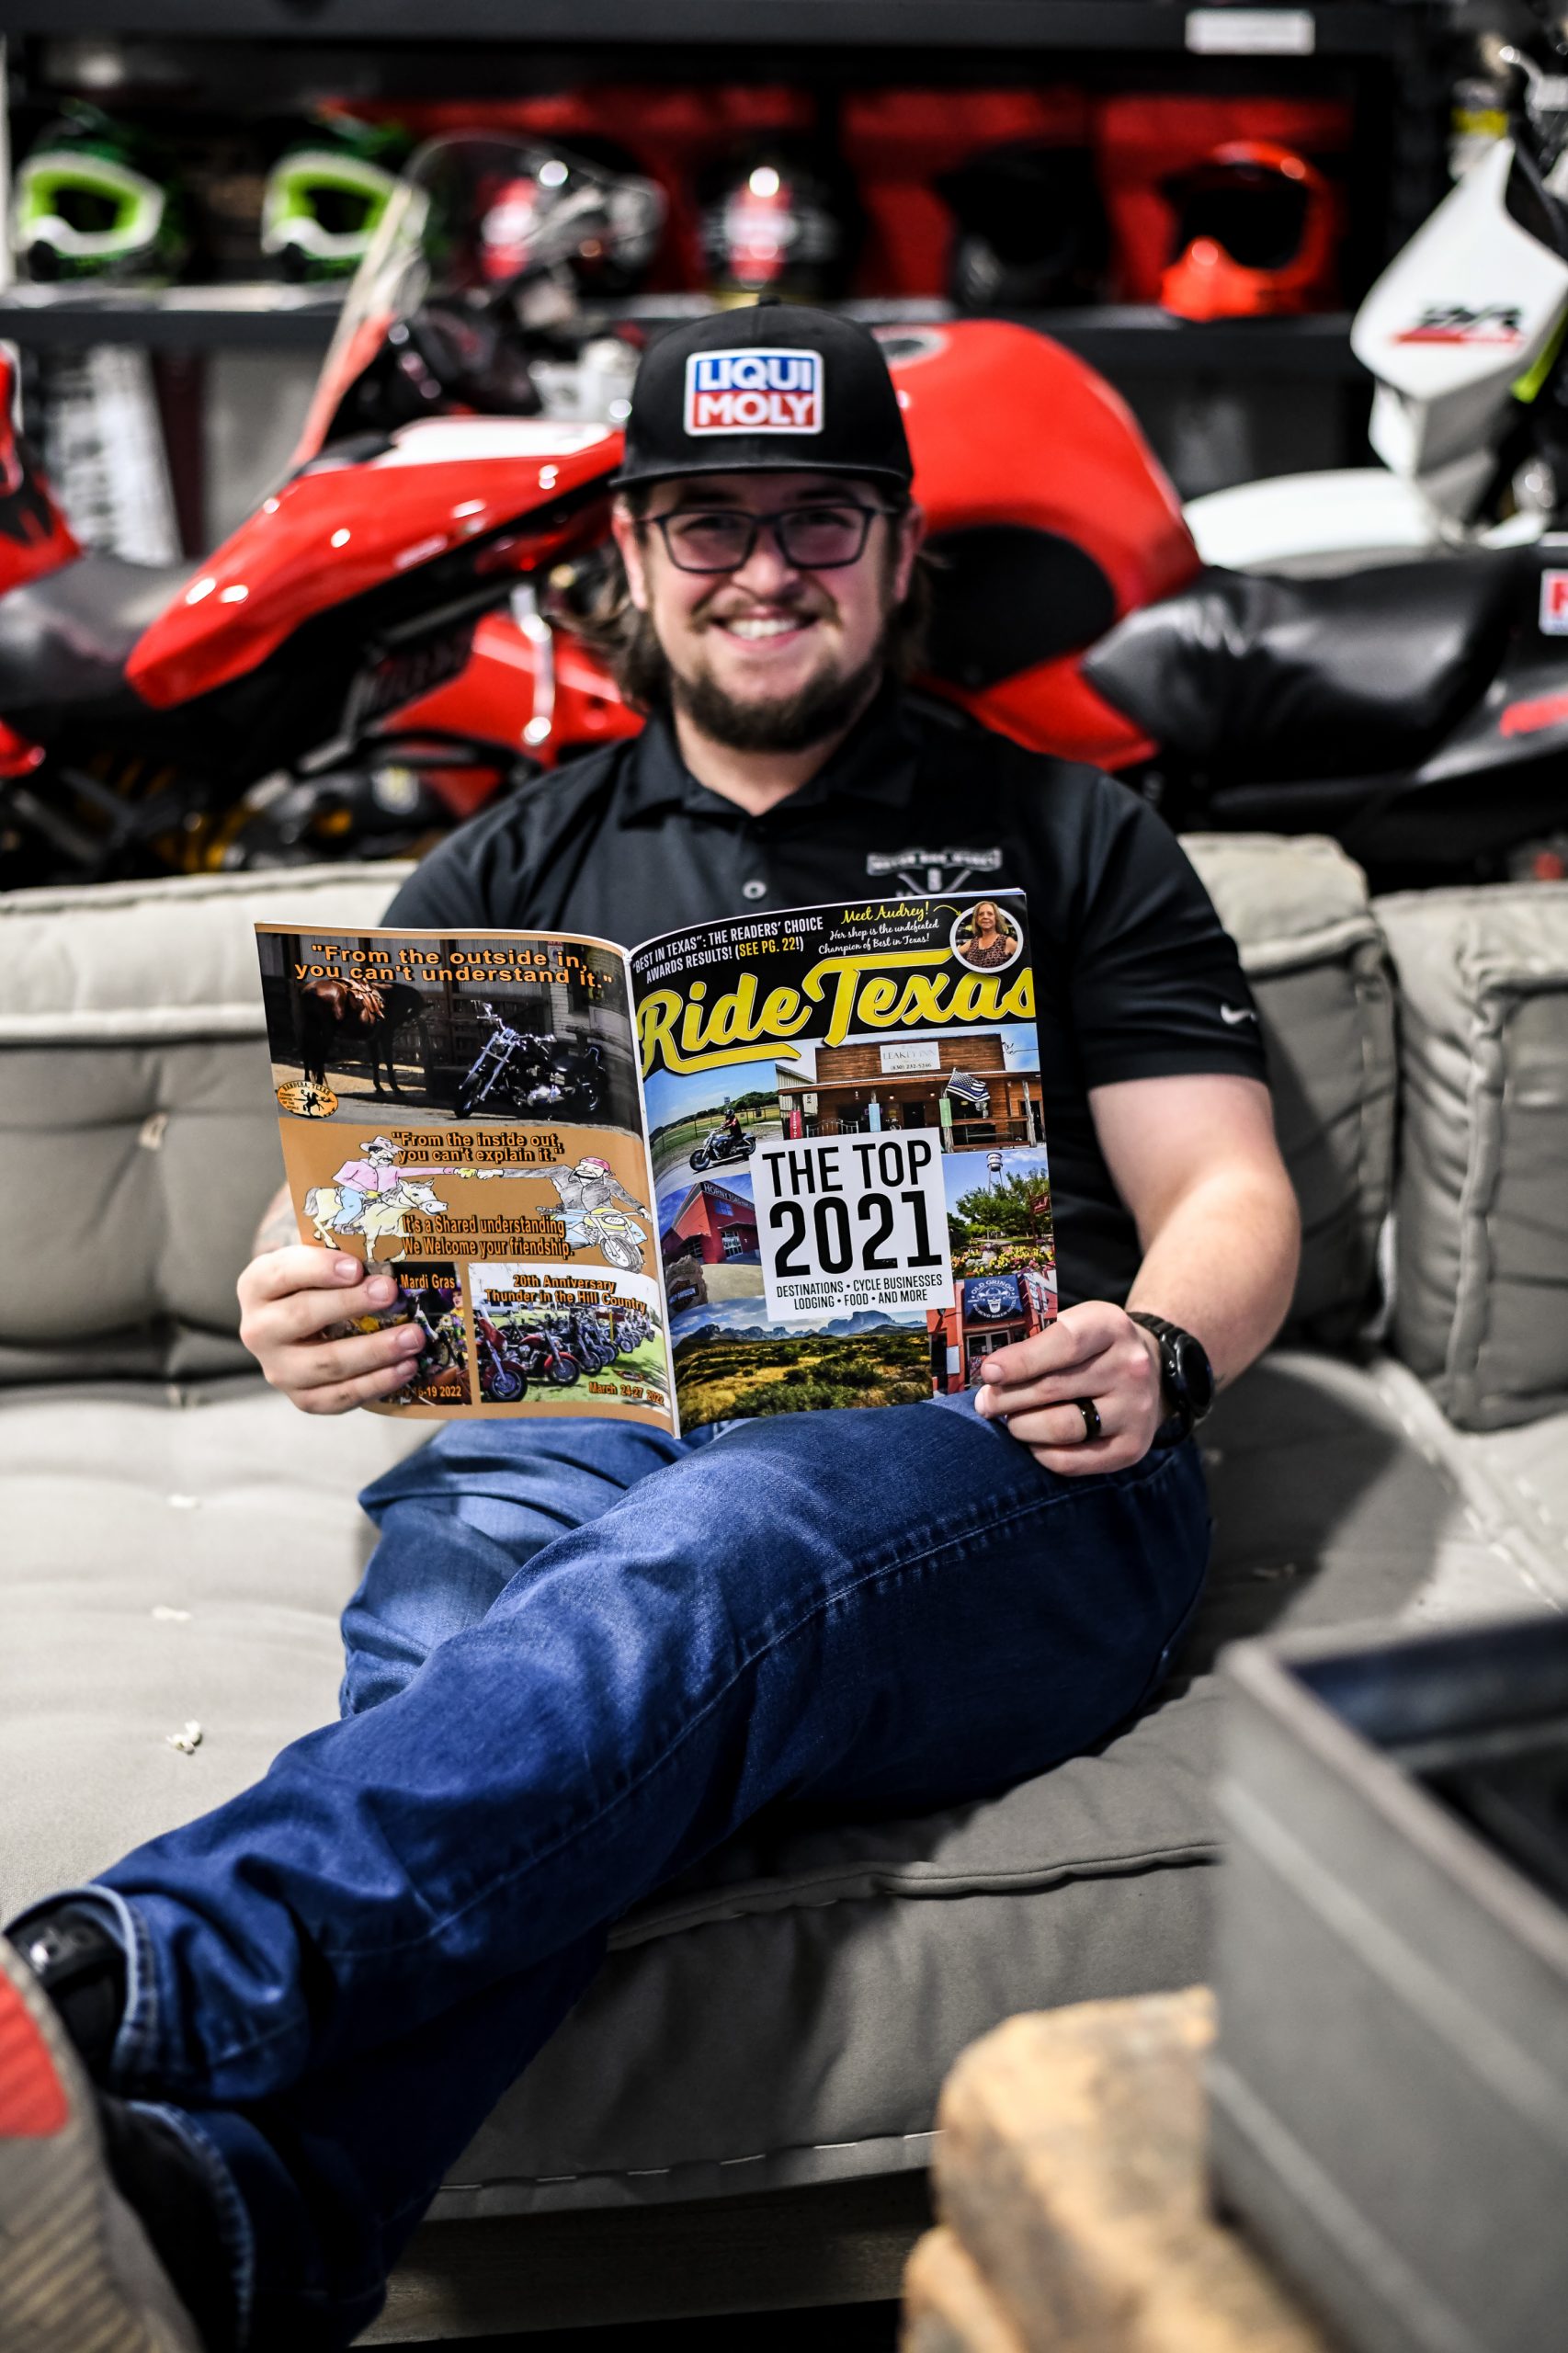 Garrison holding the Ride Texas Magazine sitting on a couch